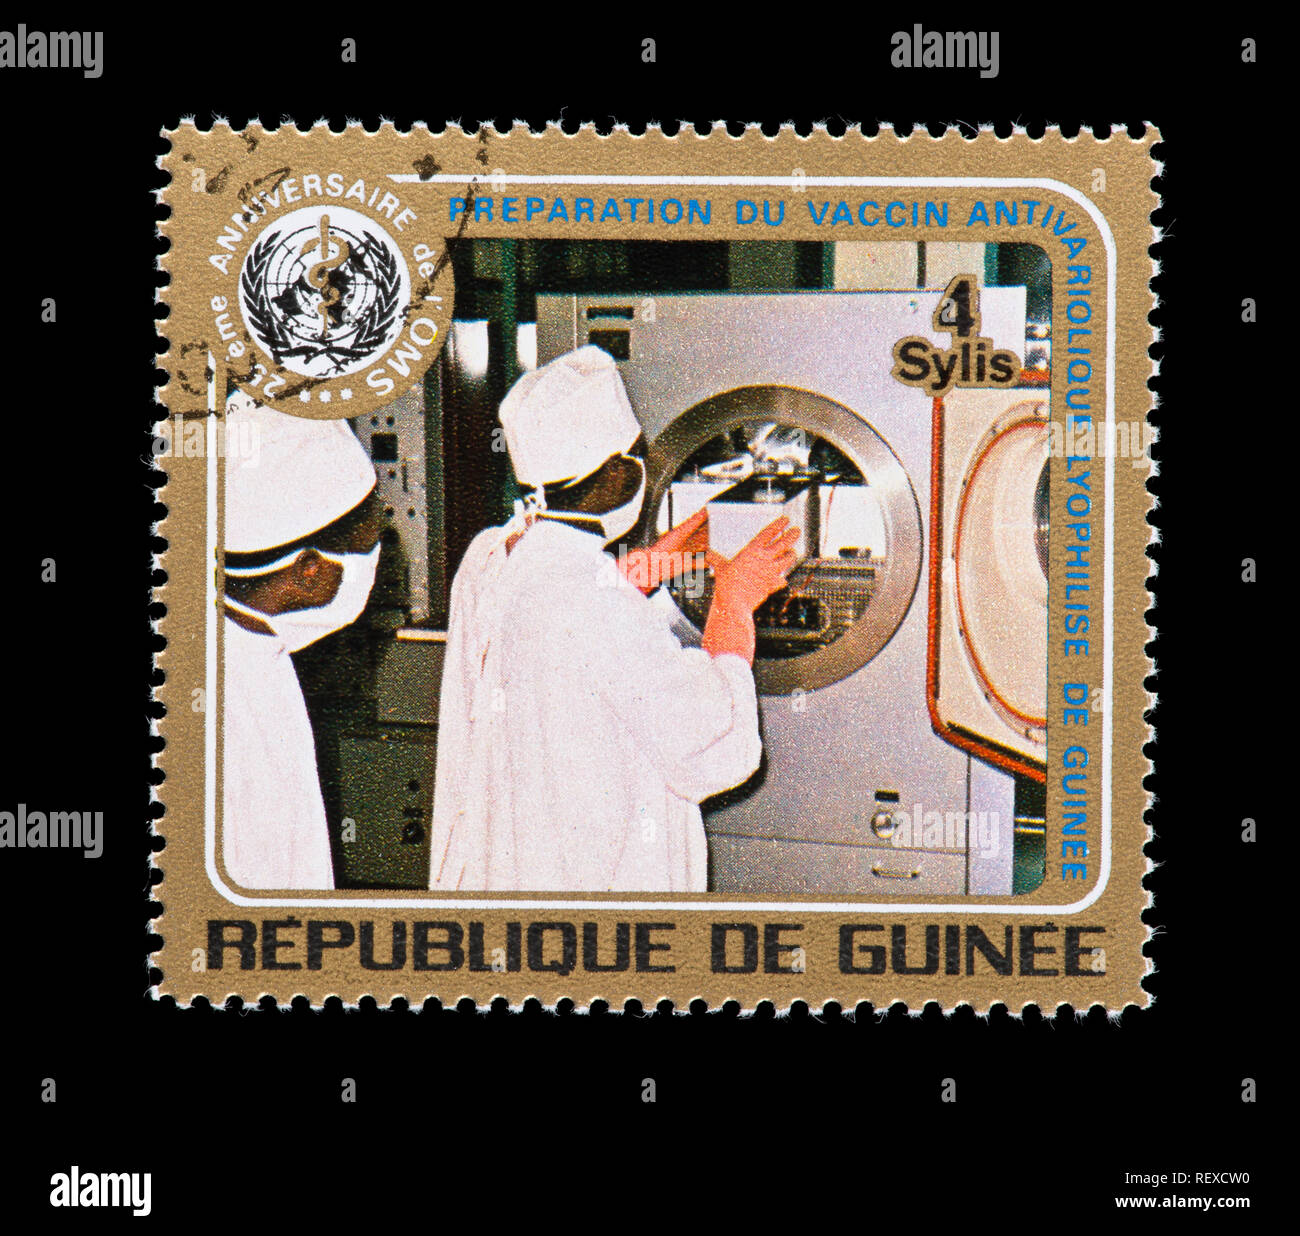 Postage stamp from Guinea depicting the WHO emblem and sterilization of vaccines Stock Photo